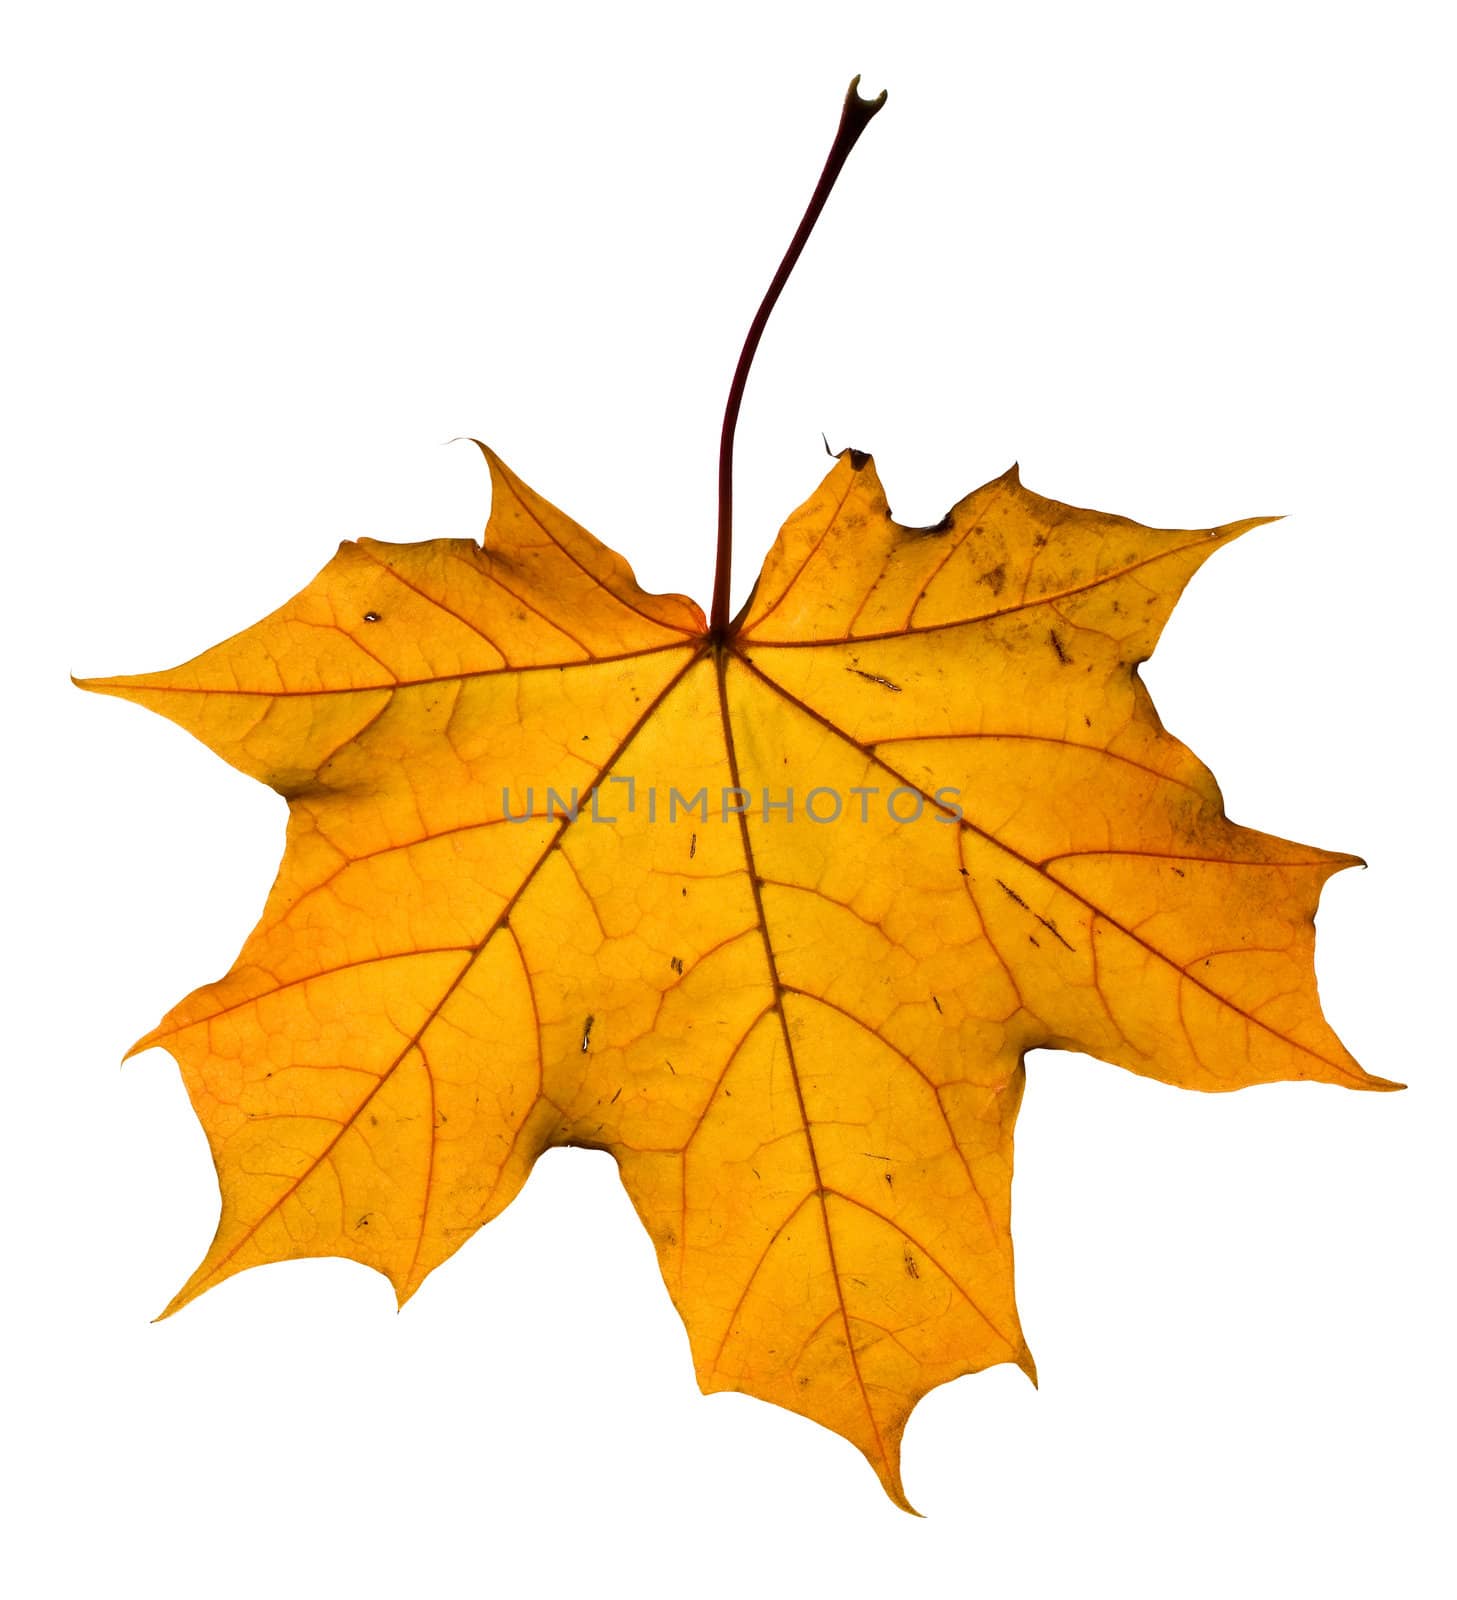 Maple leaf isolated on white. Clipping path included to replace background.